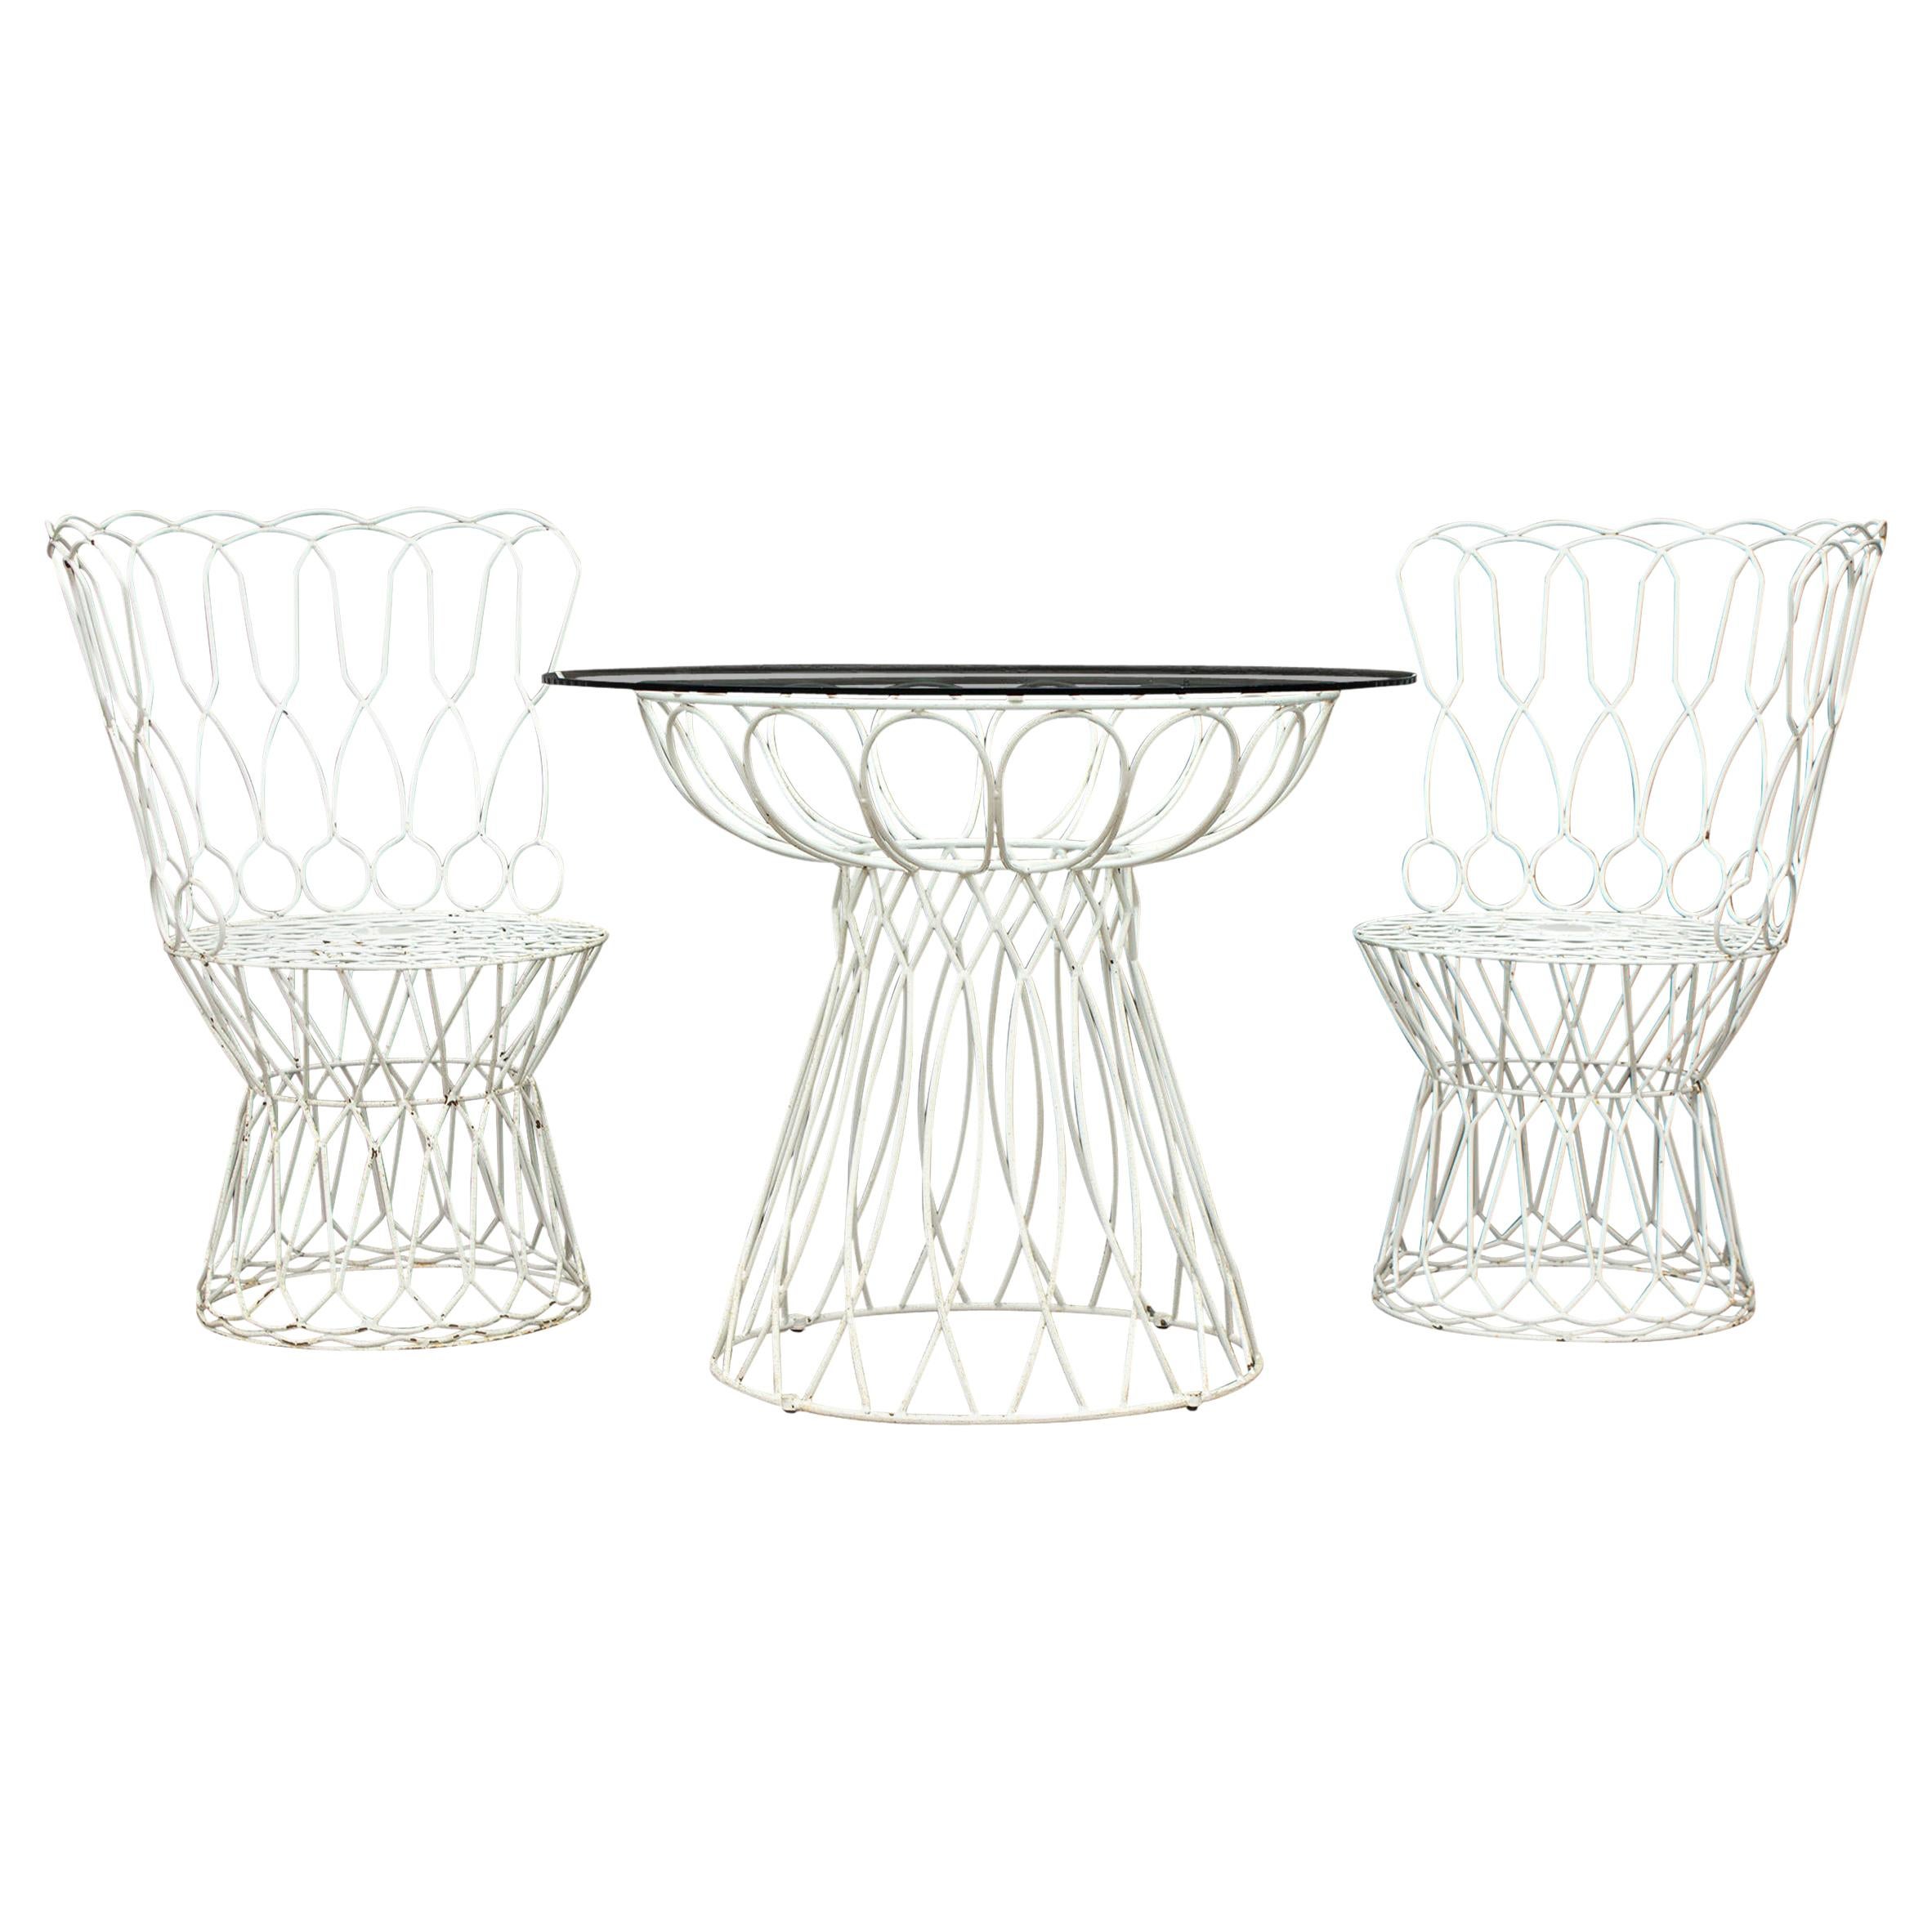 Patricia Urquiola Re-Trouve Patio Table and Chairs Set for EMU Modern, Italy